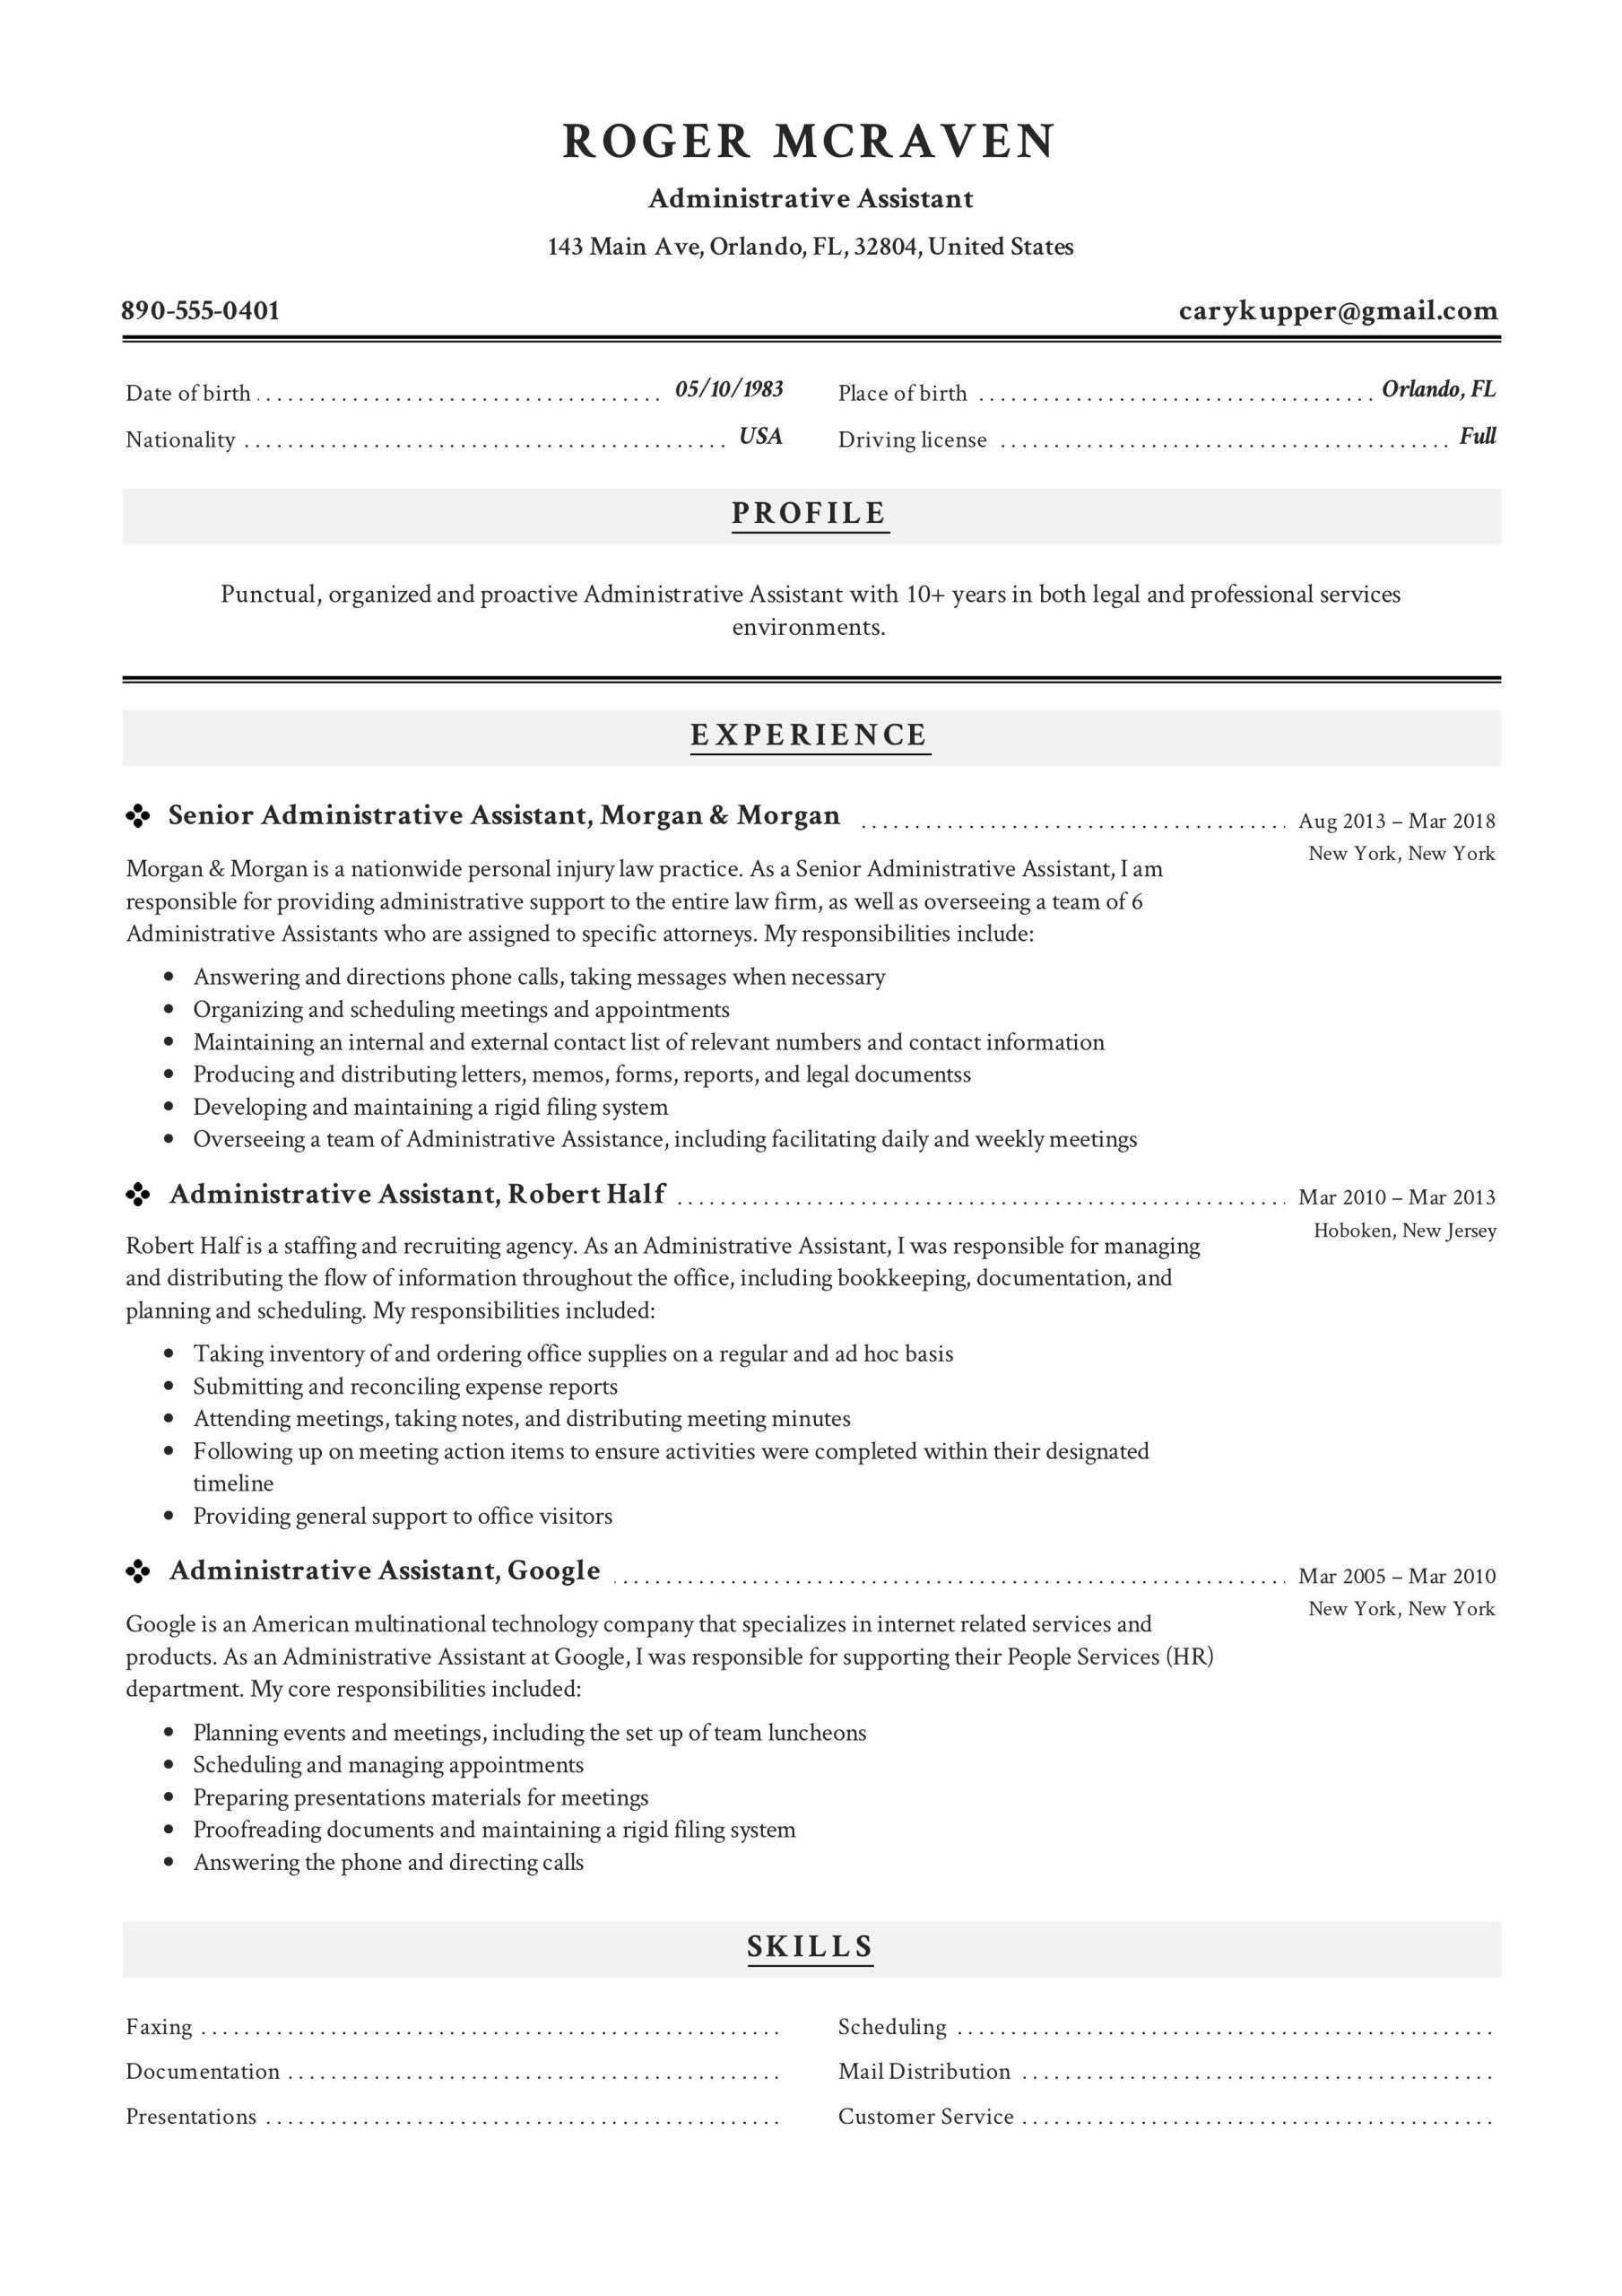 Sample Resumes for Administrative assistant Positions Free Administrative assistant Resume Sample, Template, Example, Cv …